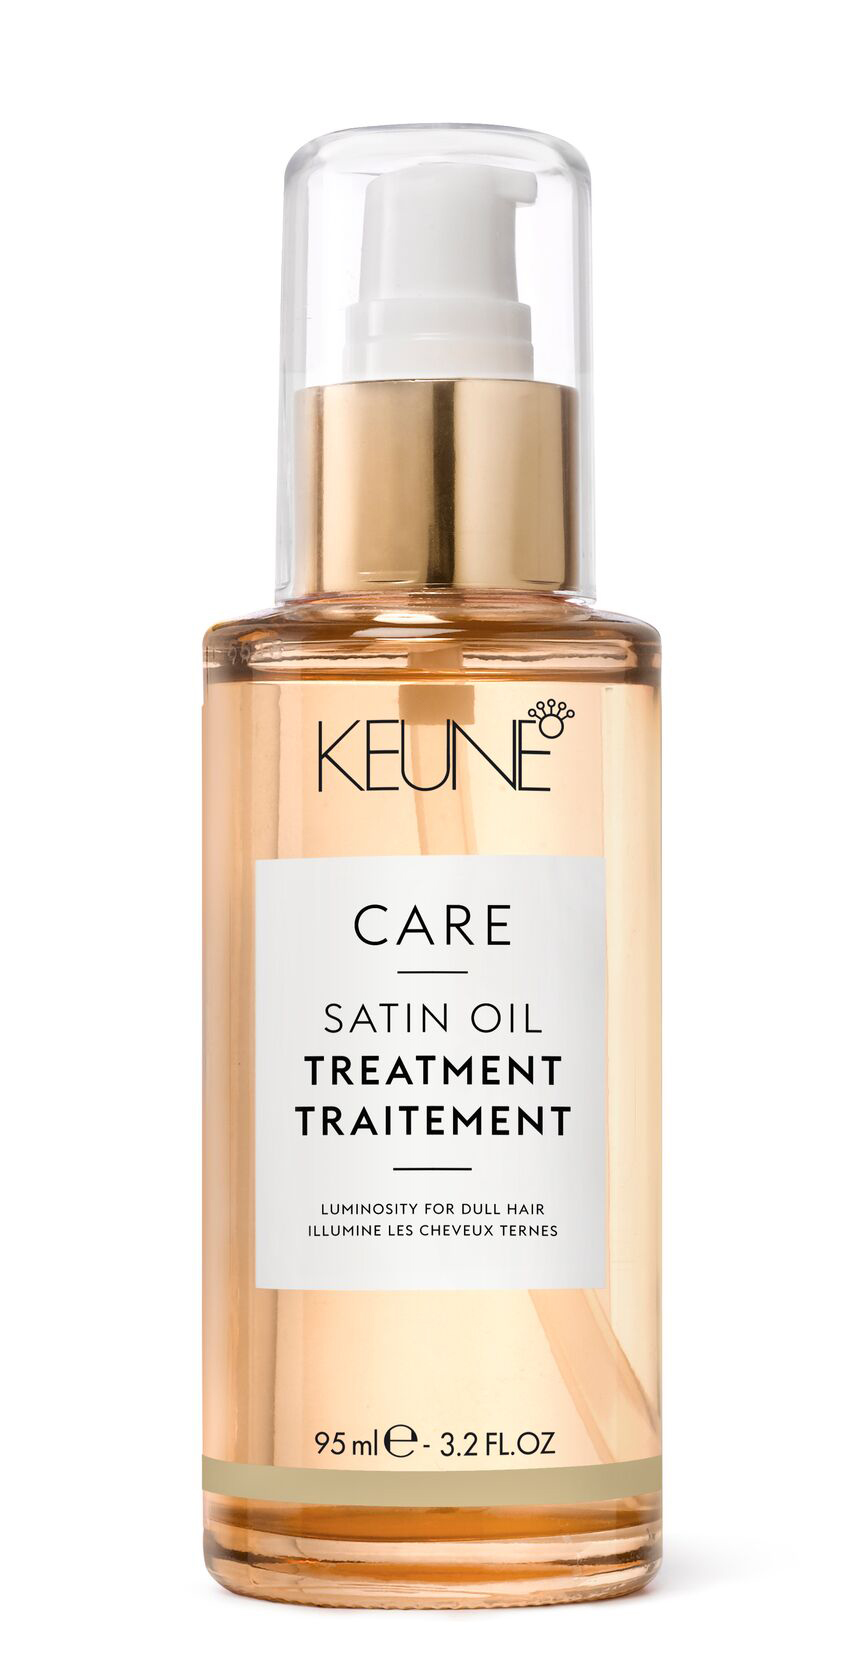 CARE SATIN OIL TREATMENT: The ideal hair care product for all hair types. With anti-frizz effect, easy to apply, and non-greasy. Hair oil nourishes split ends. On keune.ch.